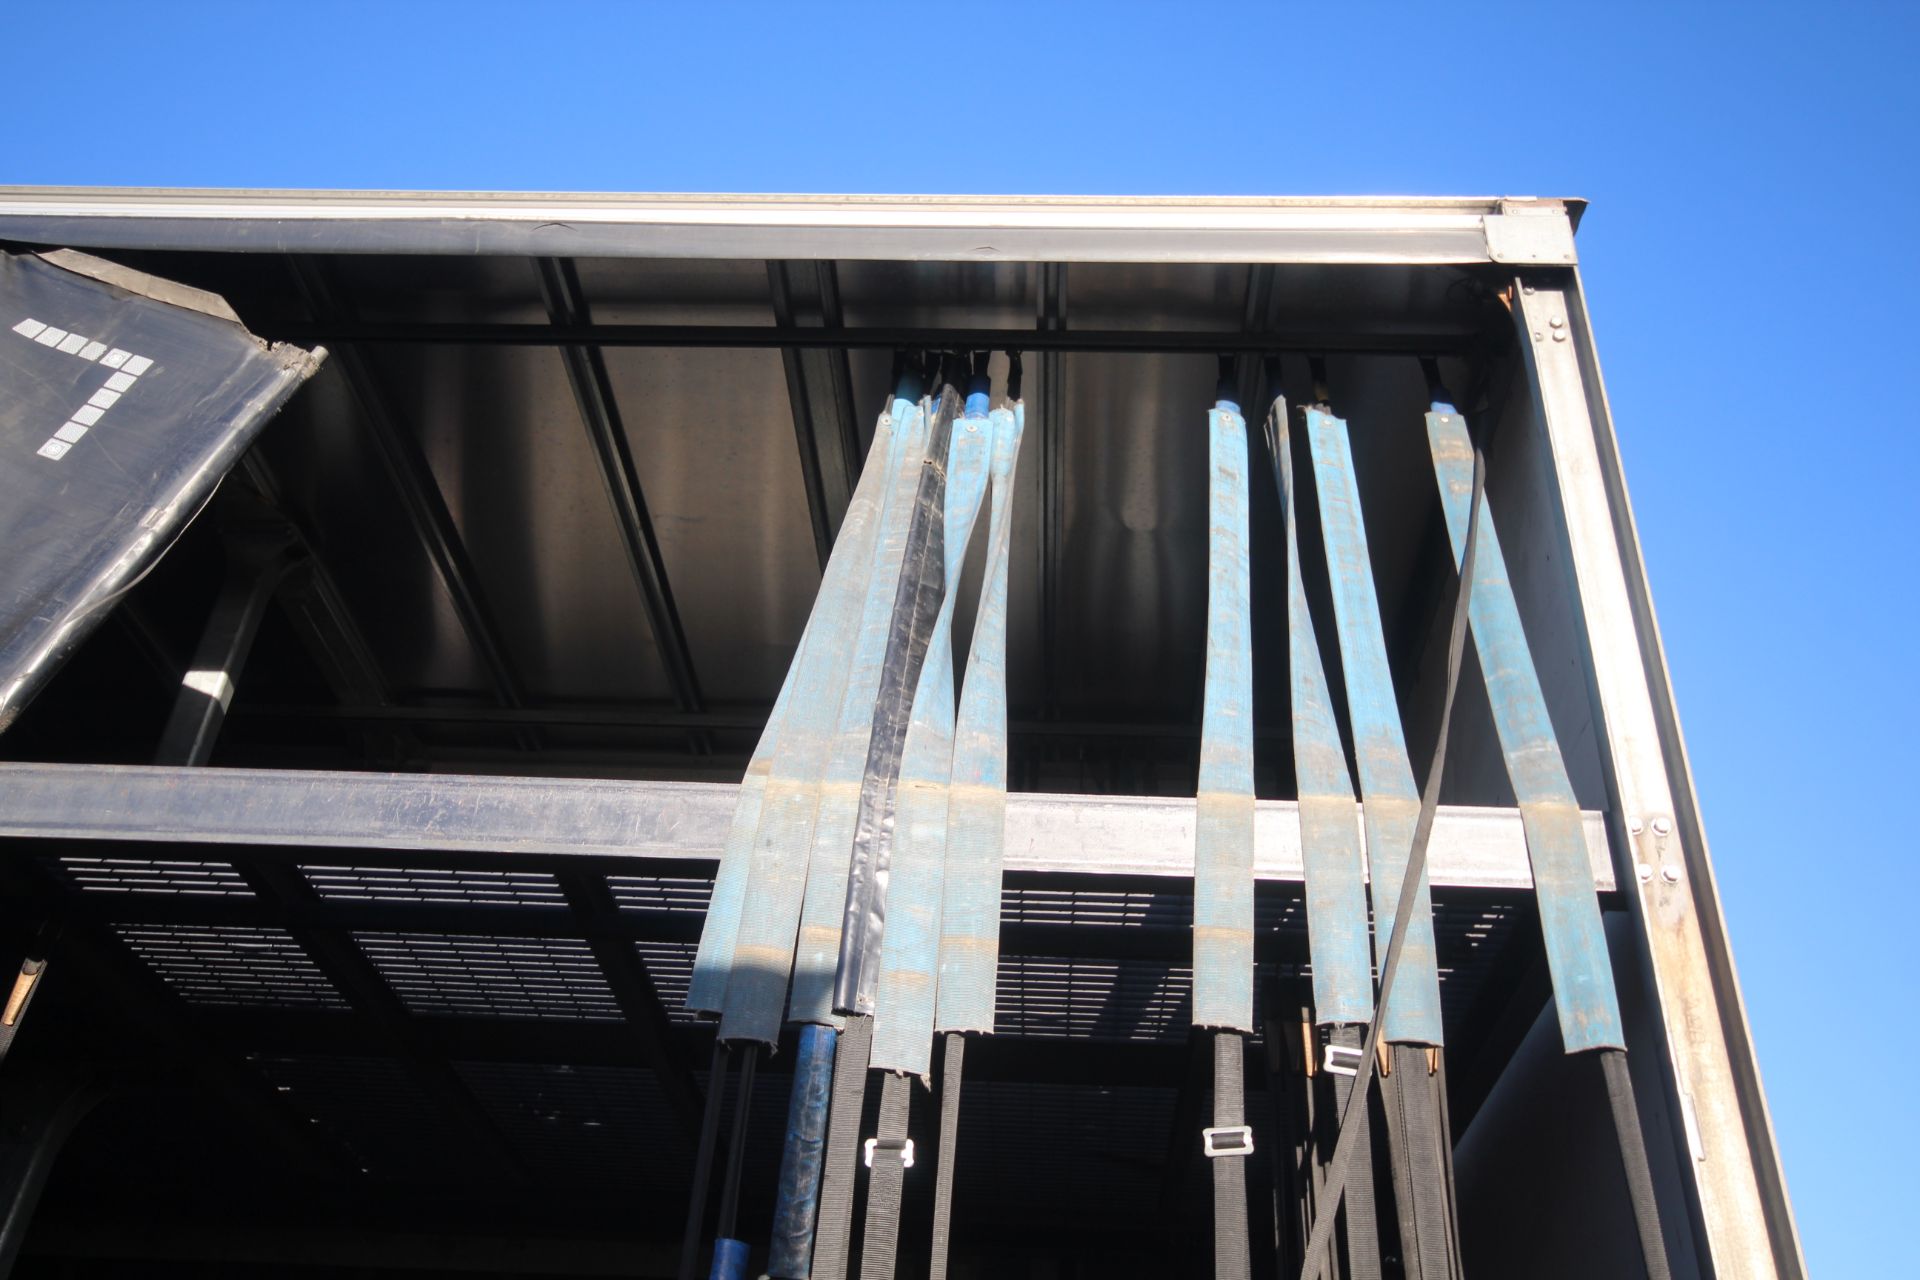 Montracon 13.6m tri-axle step frame double deck curtain-side trailer. Registration C442859. 2017. - Image 72 of 83